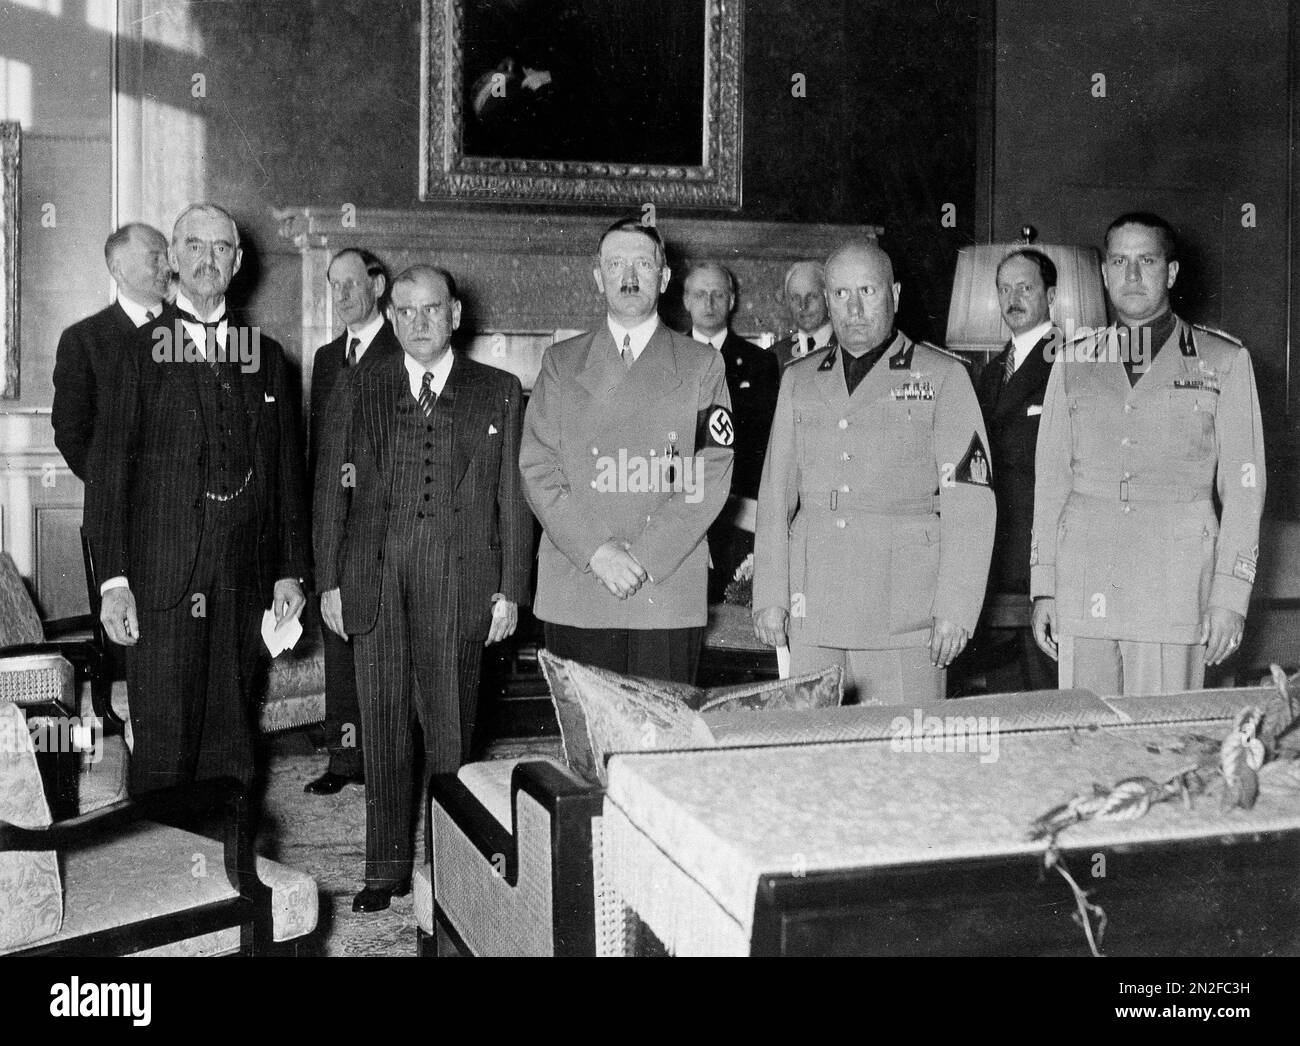 With European armies amassed and ready to fight, these power diplomats are shown at their historic Munich peace parley, Sept. 29, 1938, which ended the German-Czech crisis. From left: Neville Chamberlain, British prime minister; Edouard Baladier, French premier; Reichs-fuehrer Adolf Hitler; Italian leader Benito Mussolini; Count Galeazzo Ciano, Italian foreign minister. (AP Photo) Stock Photo